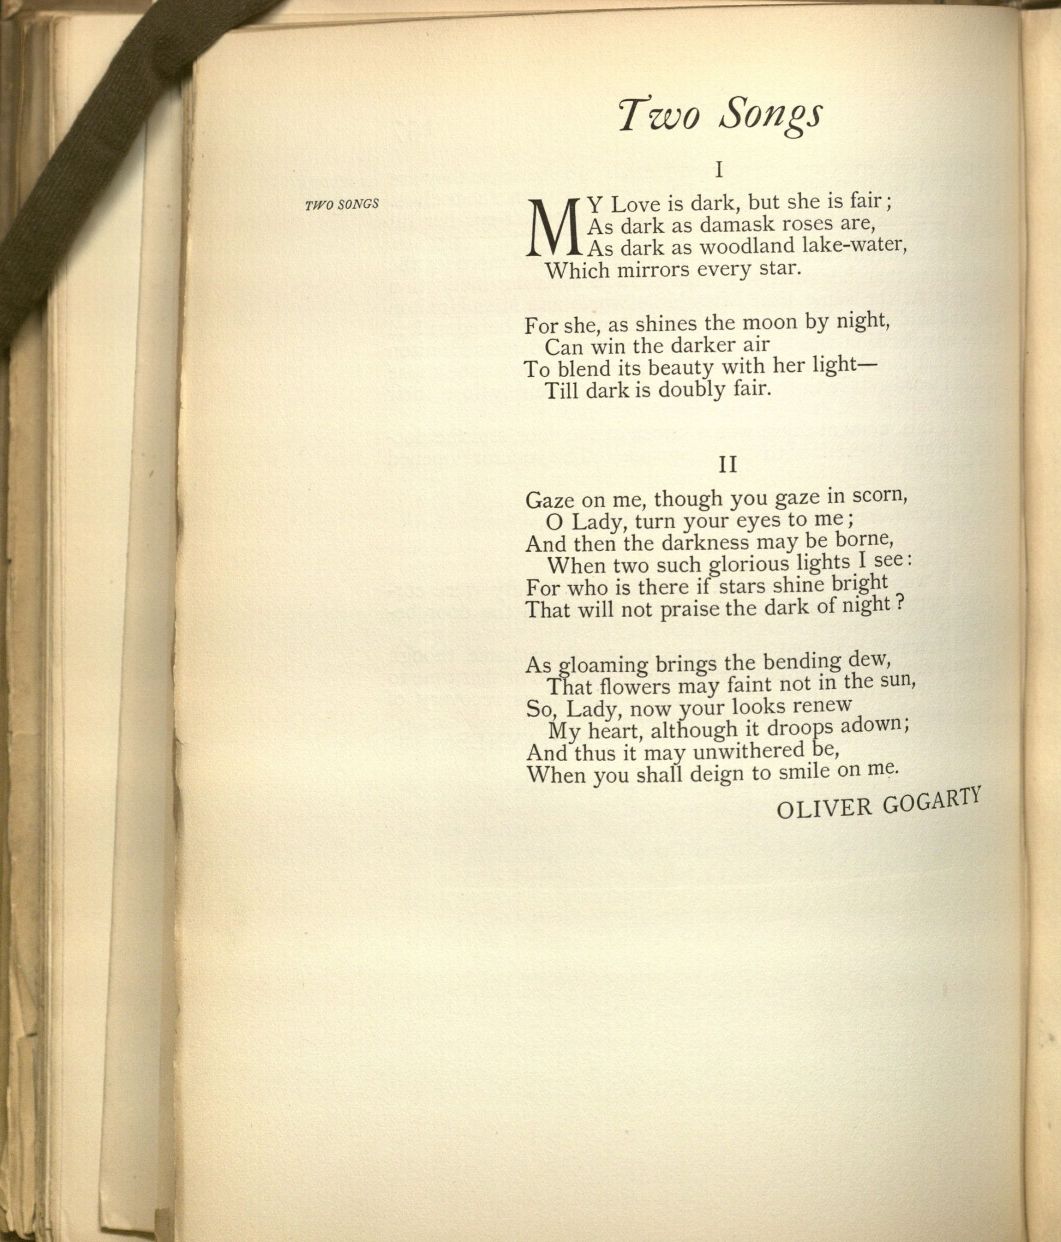 Image of "Two Songs" by Oliver St. John Gogarty